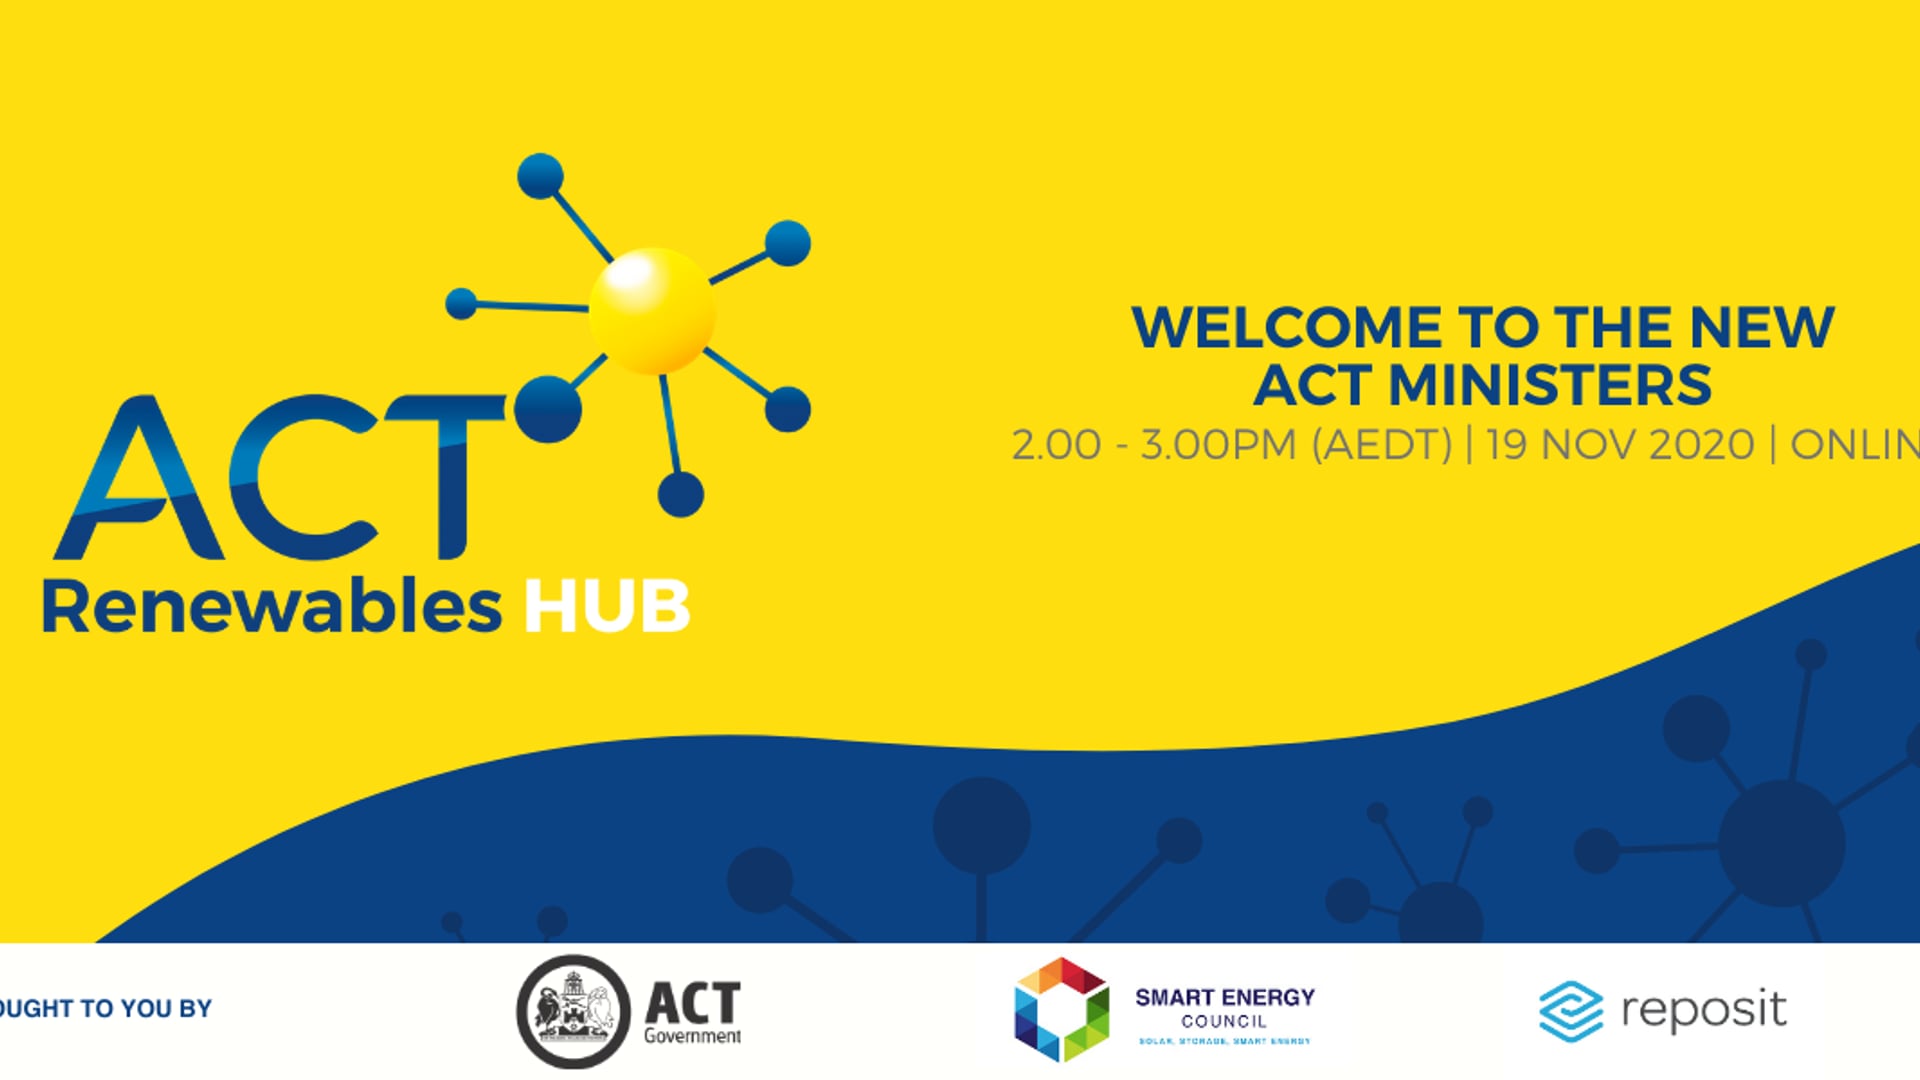 Welcome to the new ACT Ministers – 19 November 2020